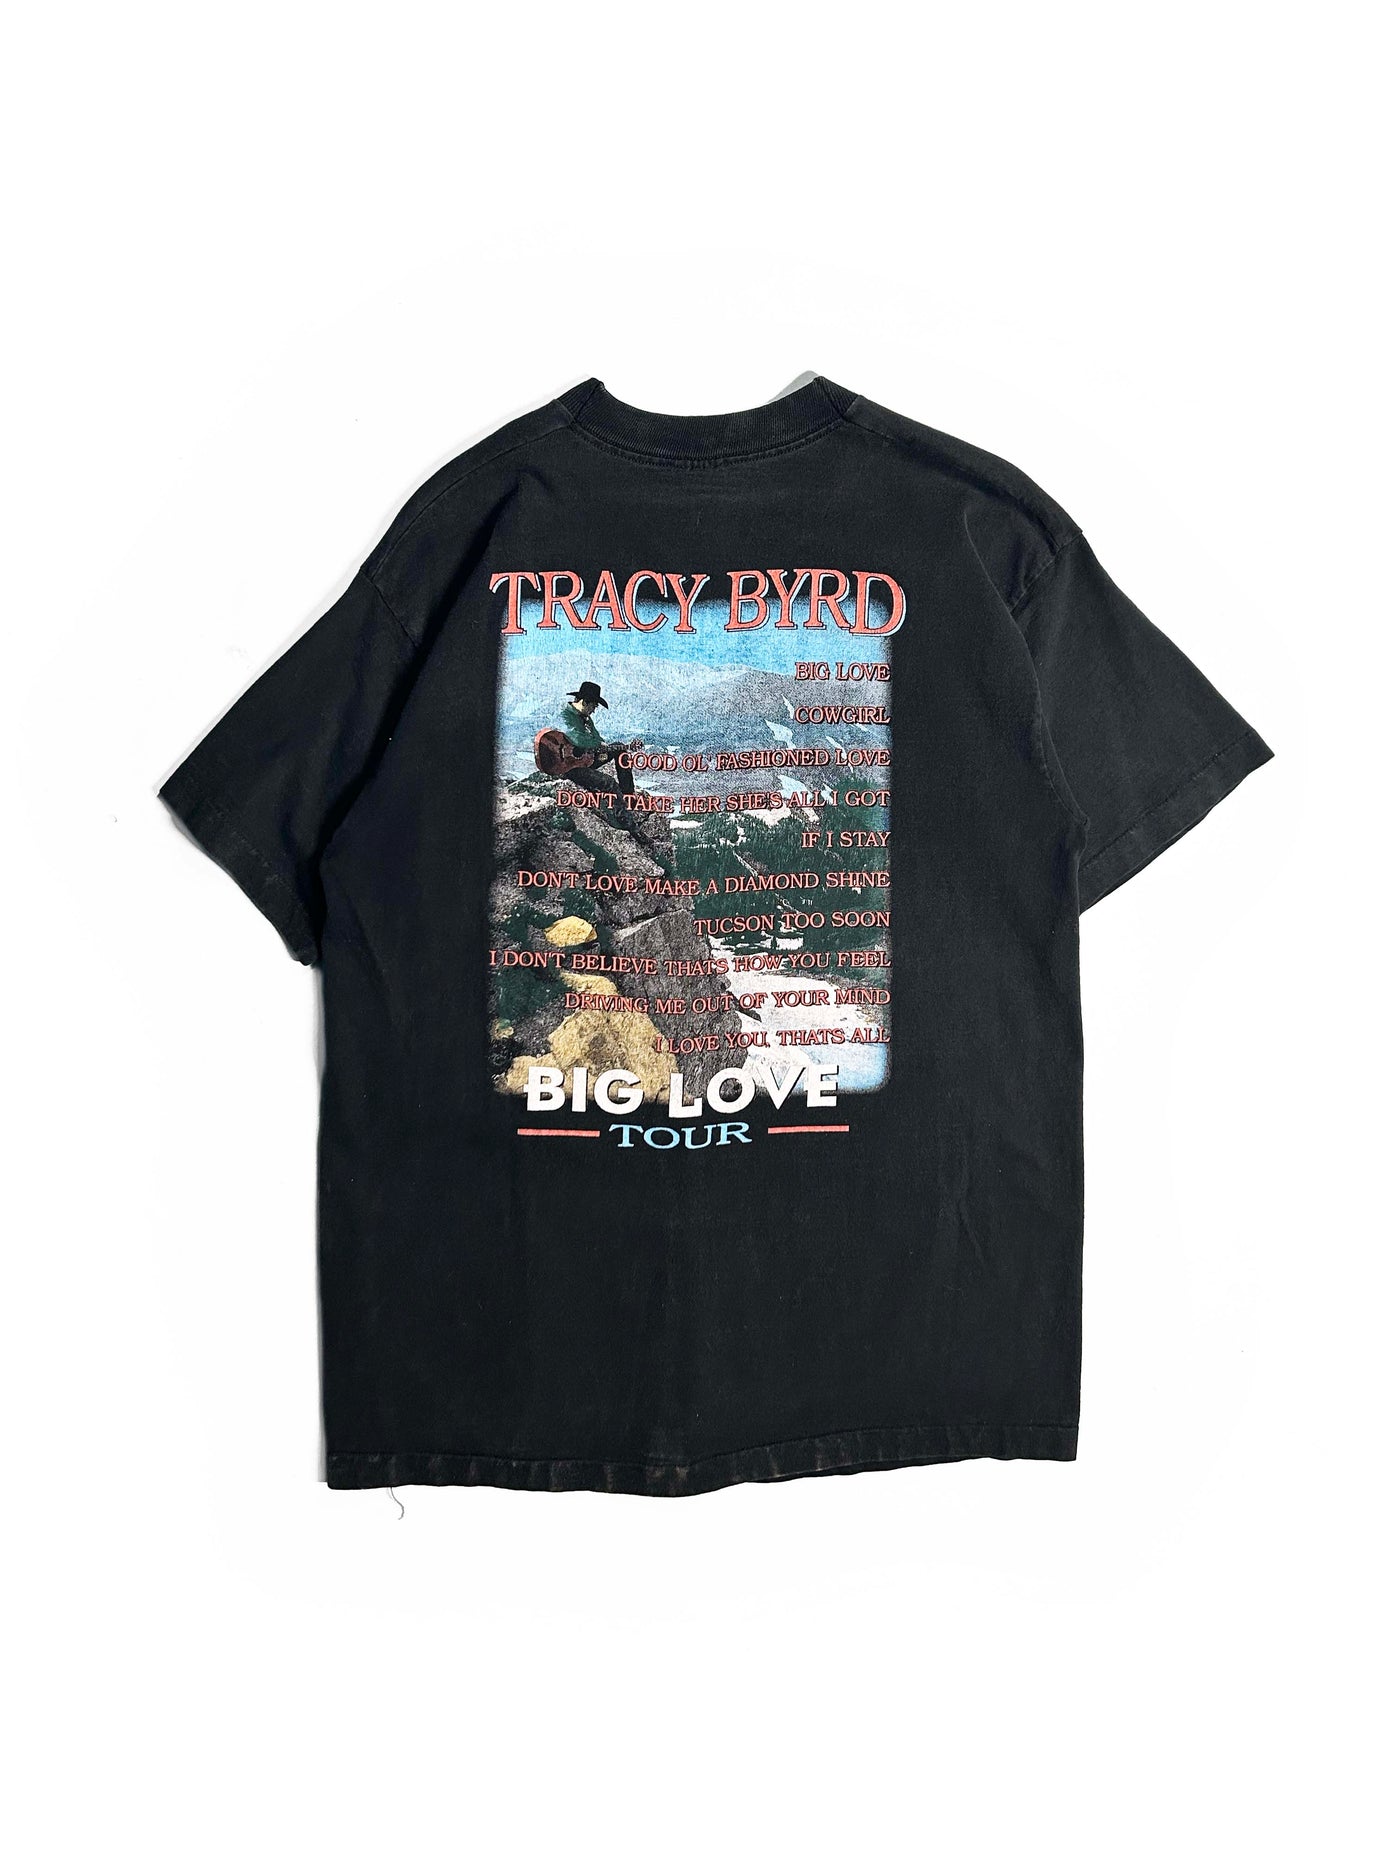 Vintage 1996 Tracy Byrd Tour T-Shirt